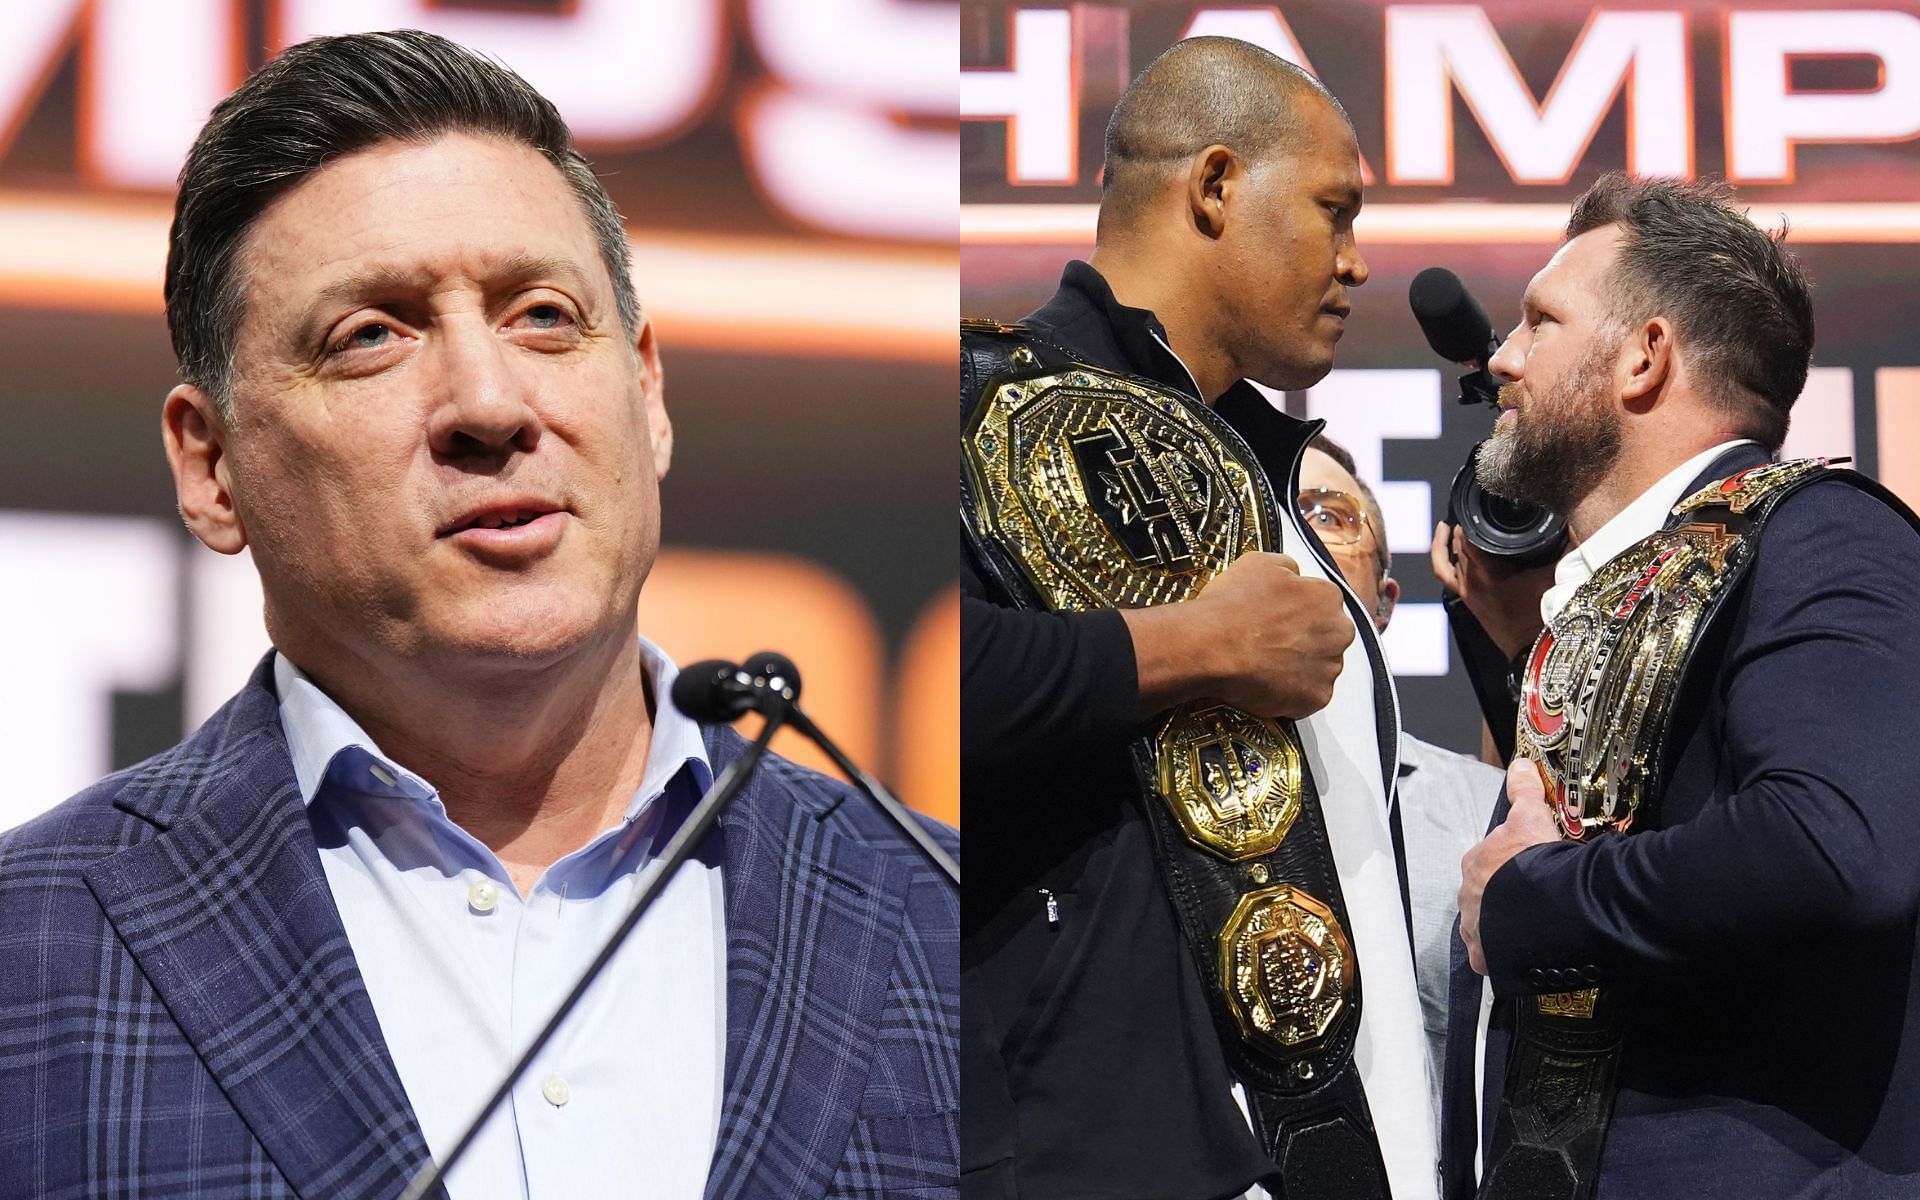 PFL CEO Peter Murray hints at major announcement following PFL vs. Bellator heavyweight main event [Image courtesy: PFL - Press Release]